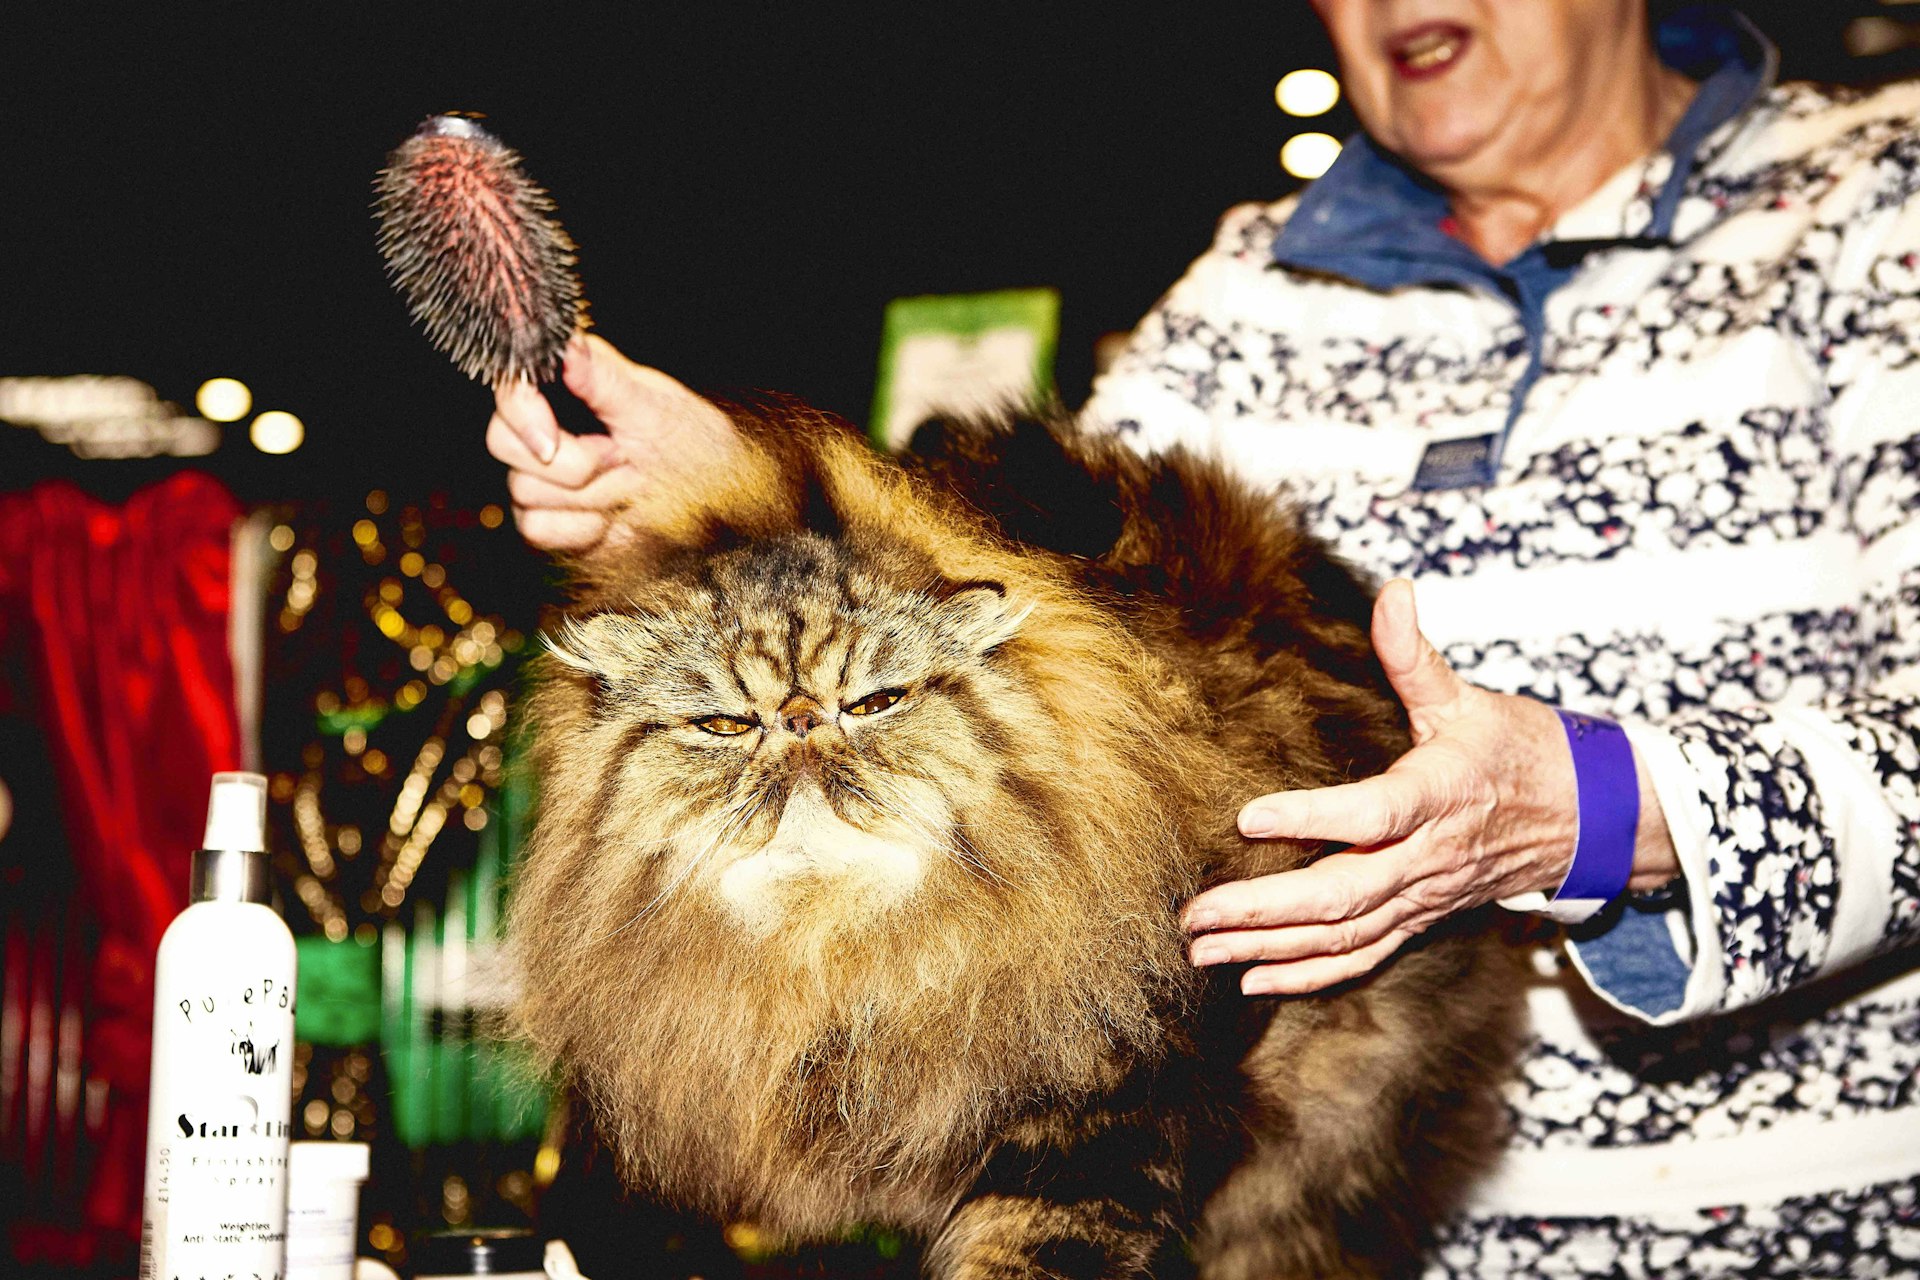 Dispatches from Birmingham’s Supreme Cat Show